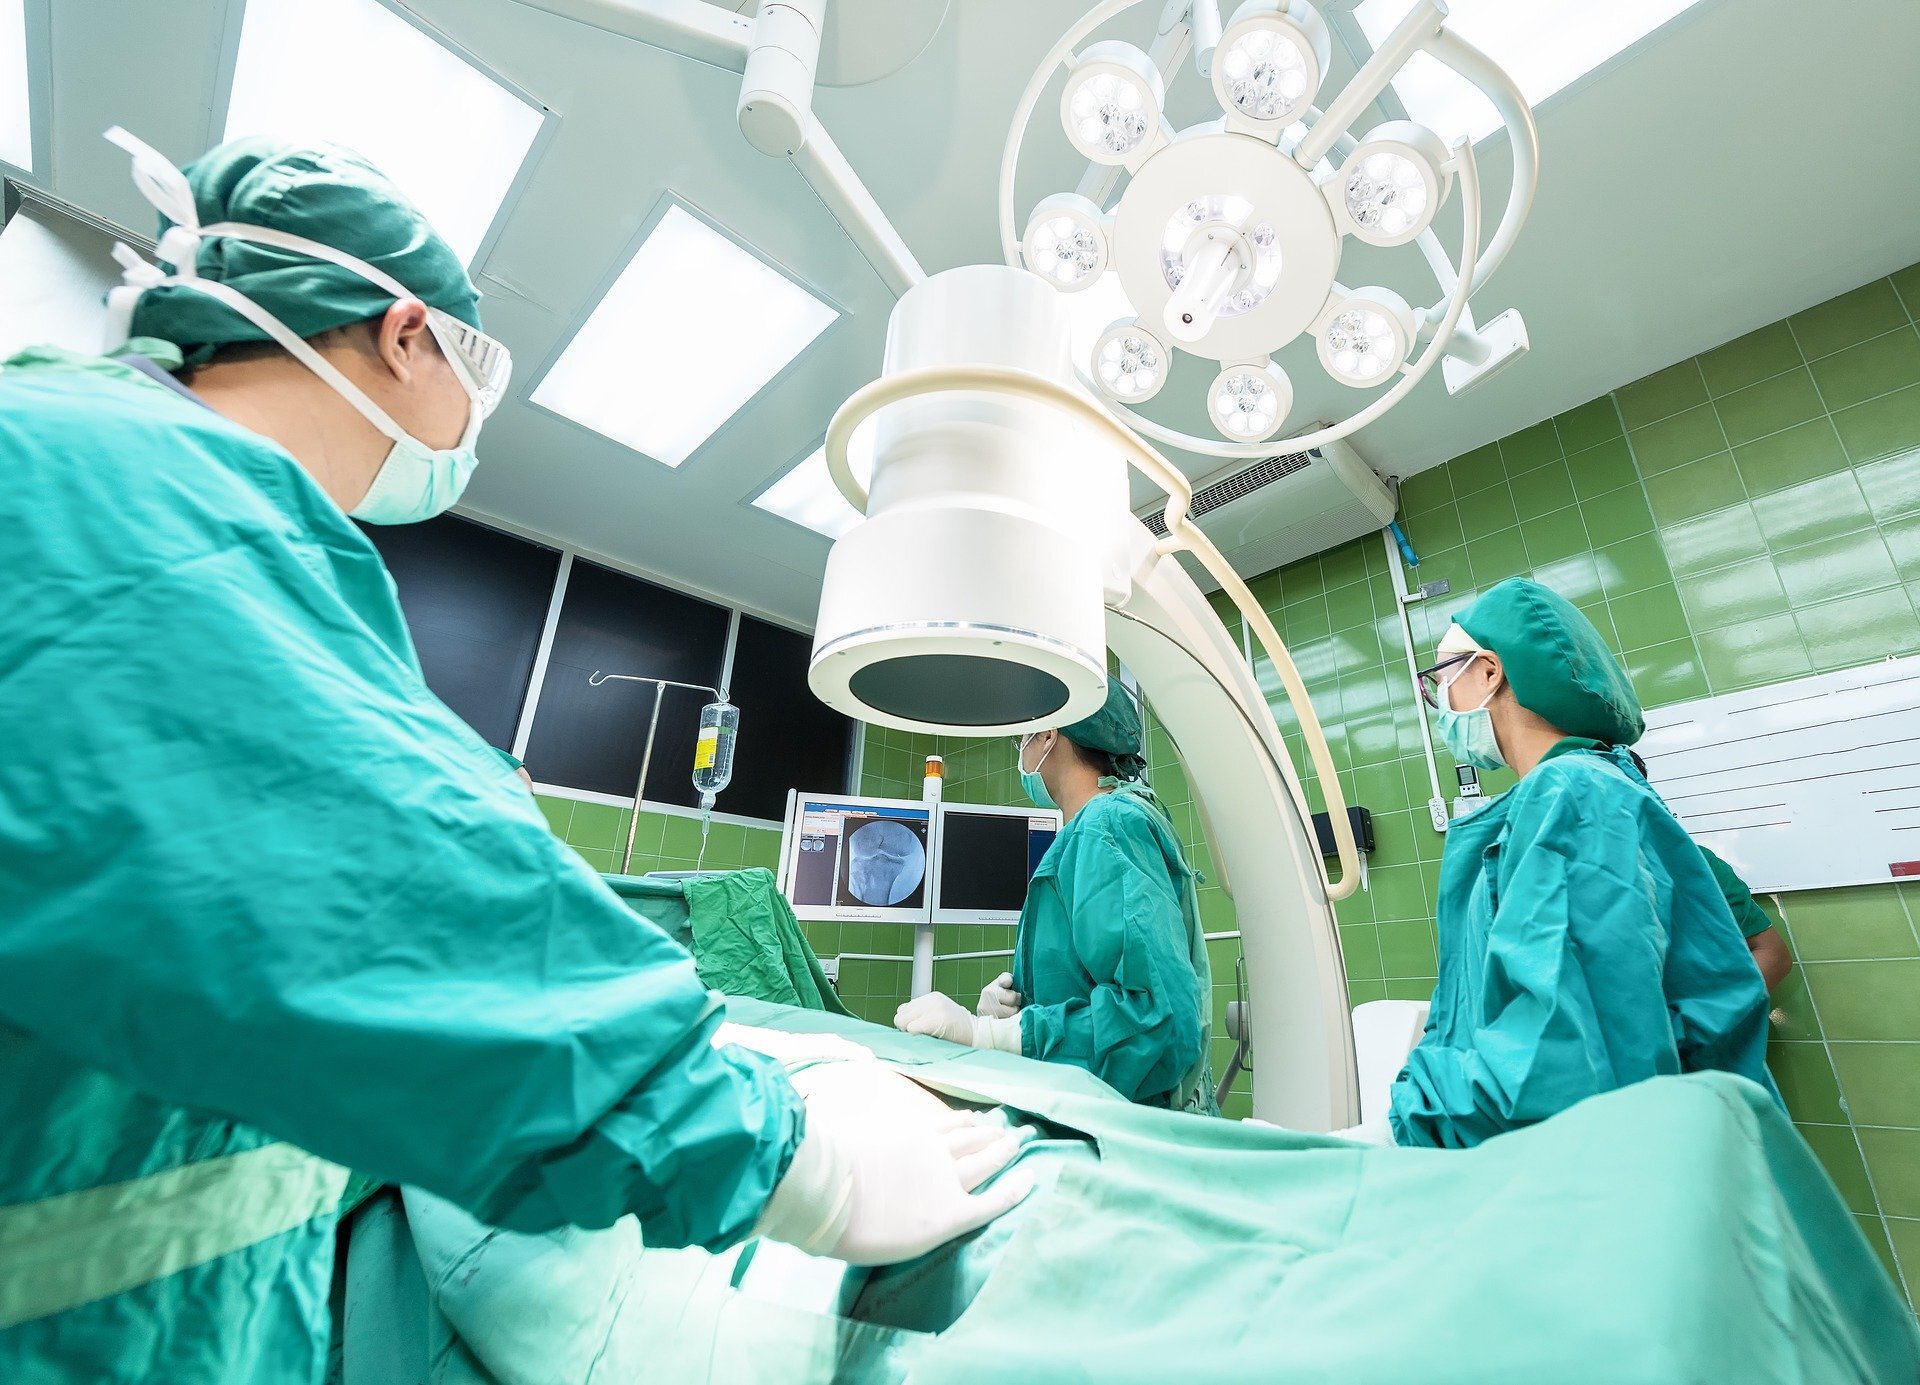 #Understanding the value of a physician’s intuition when assessing risk factors for surgery